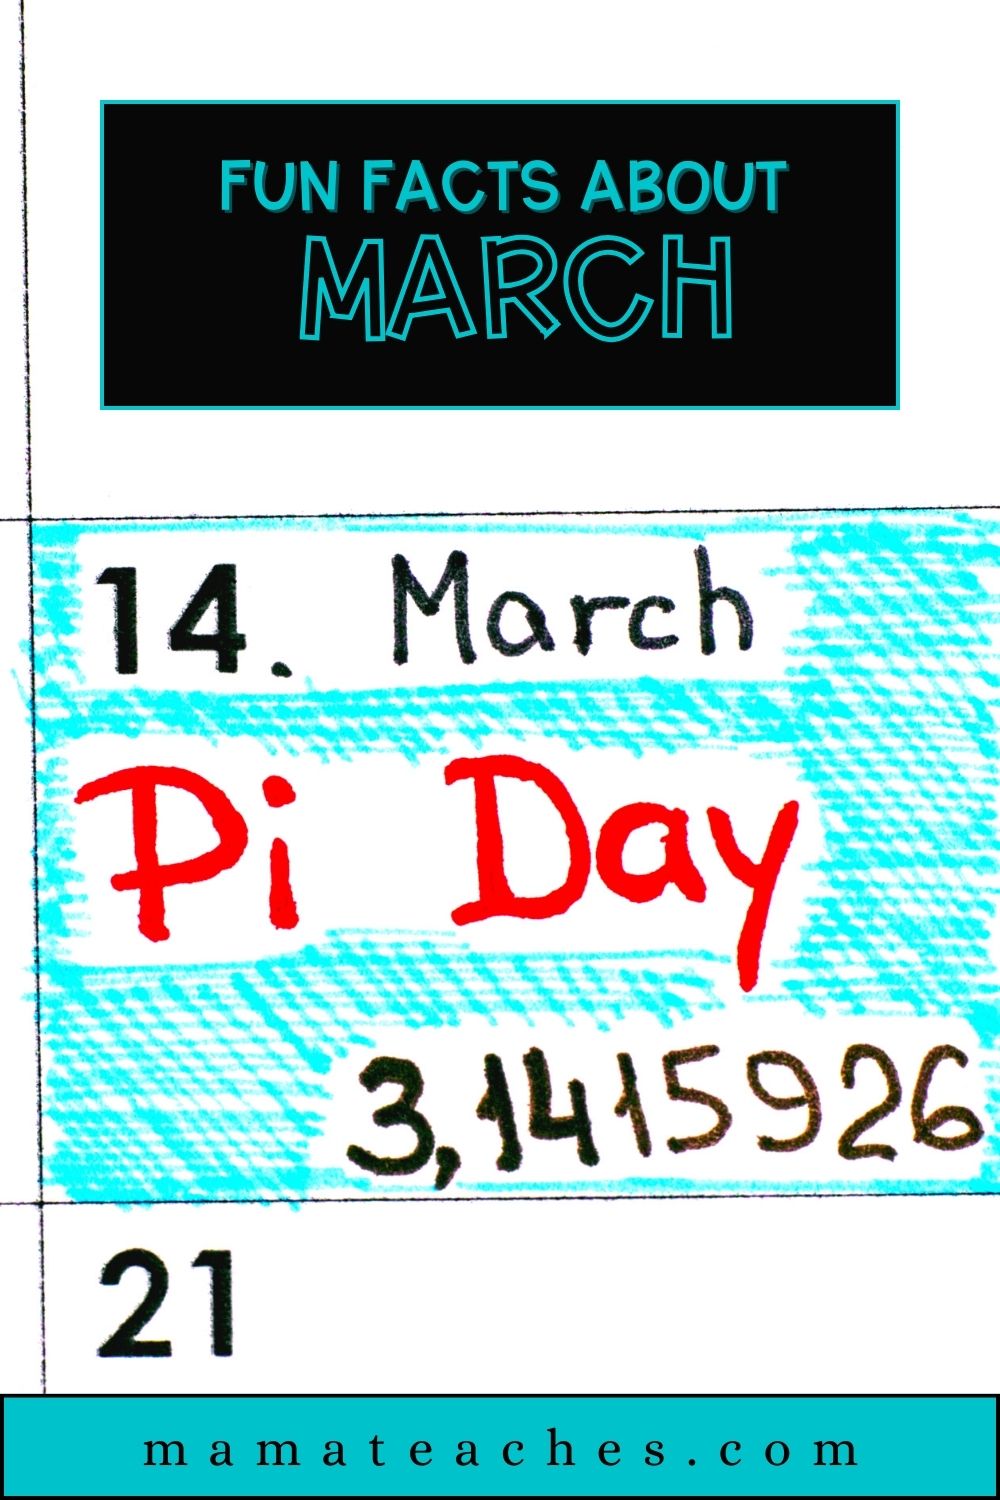 Fun Facts About March